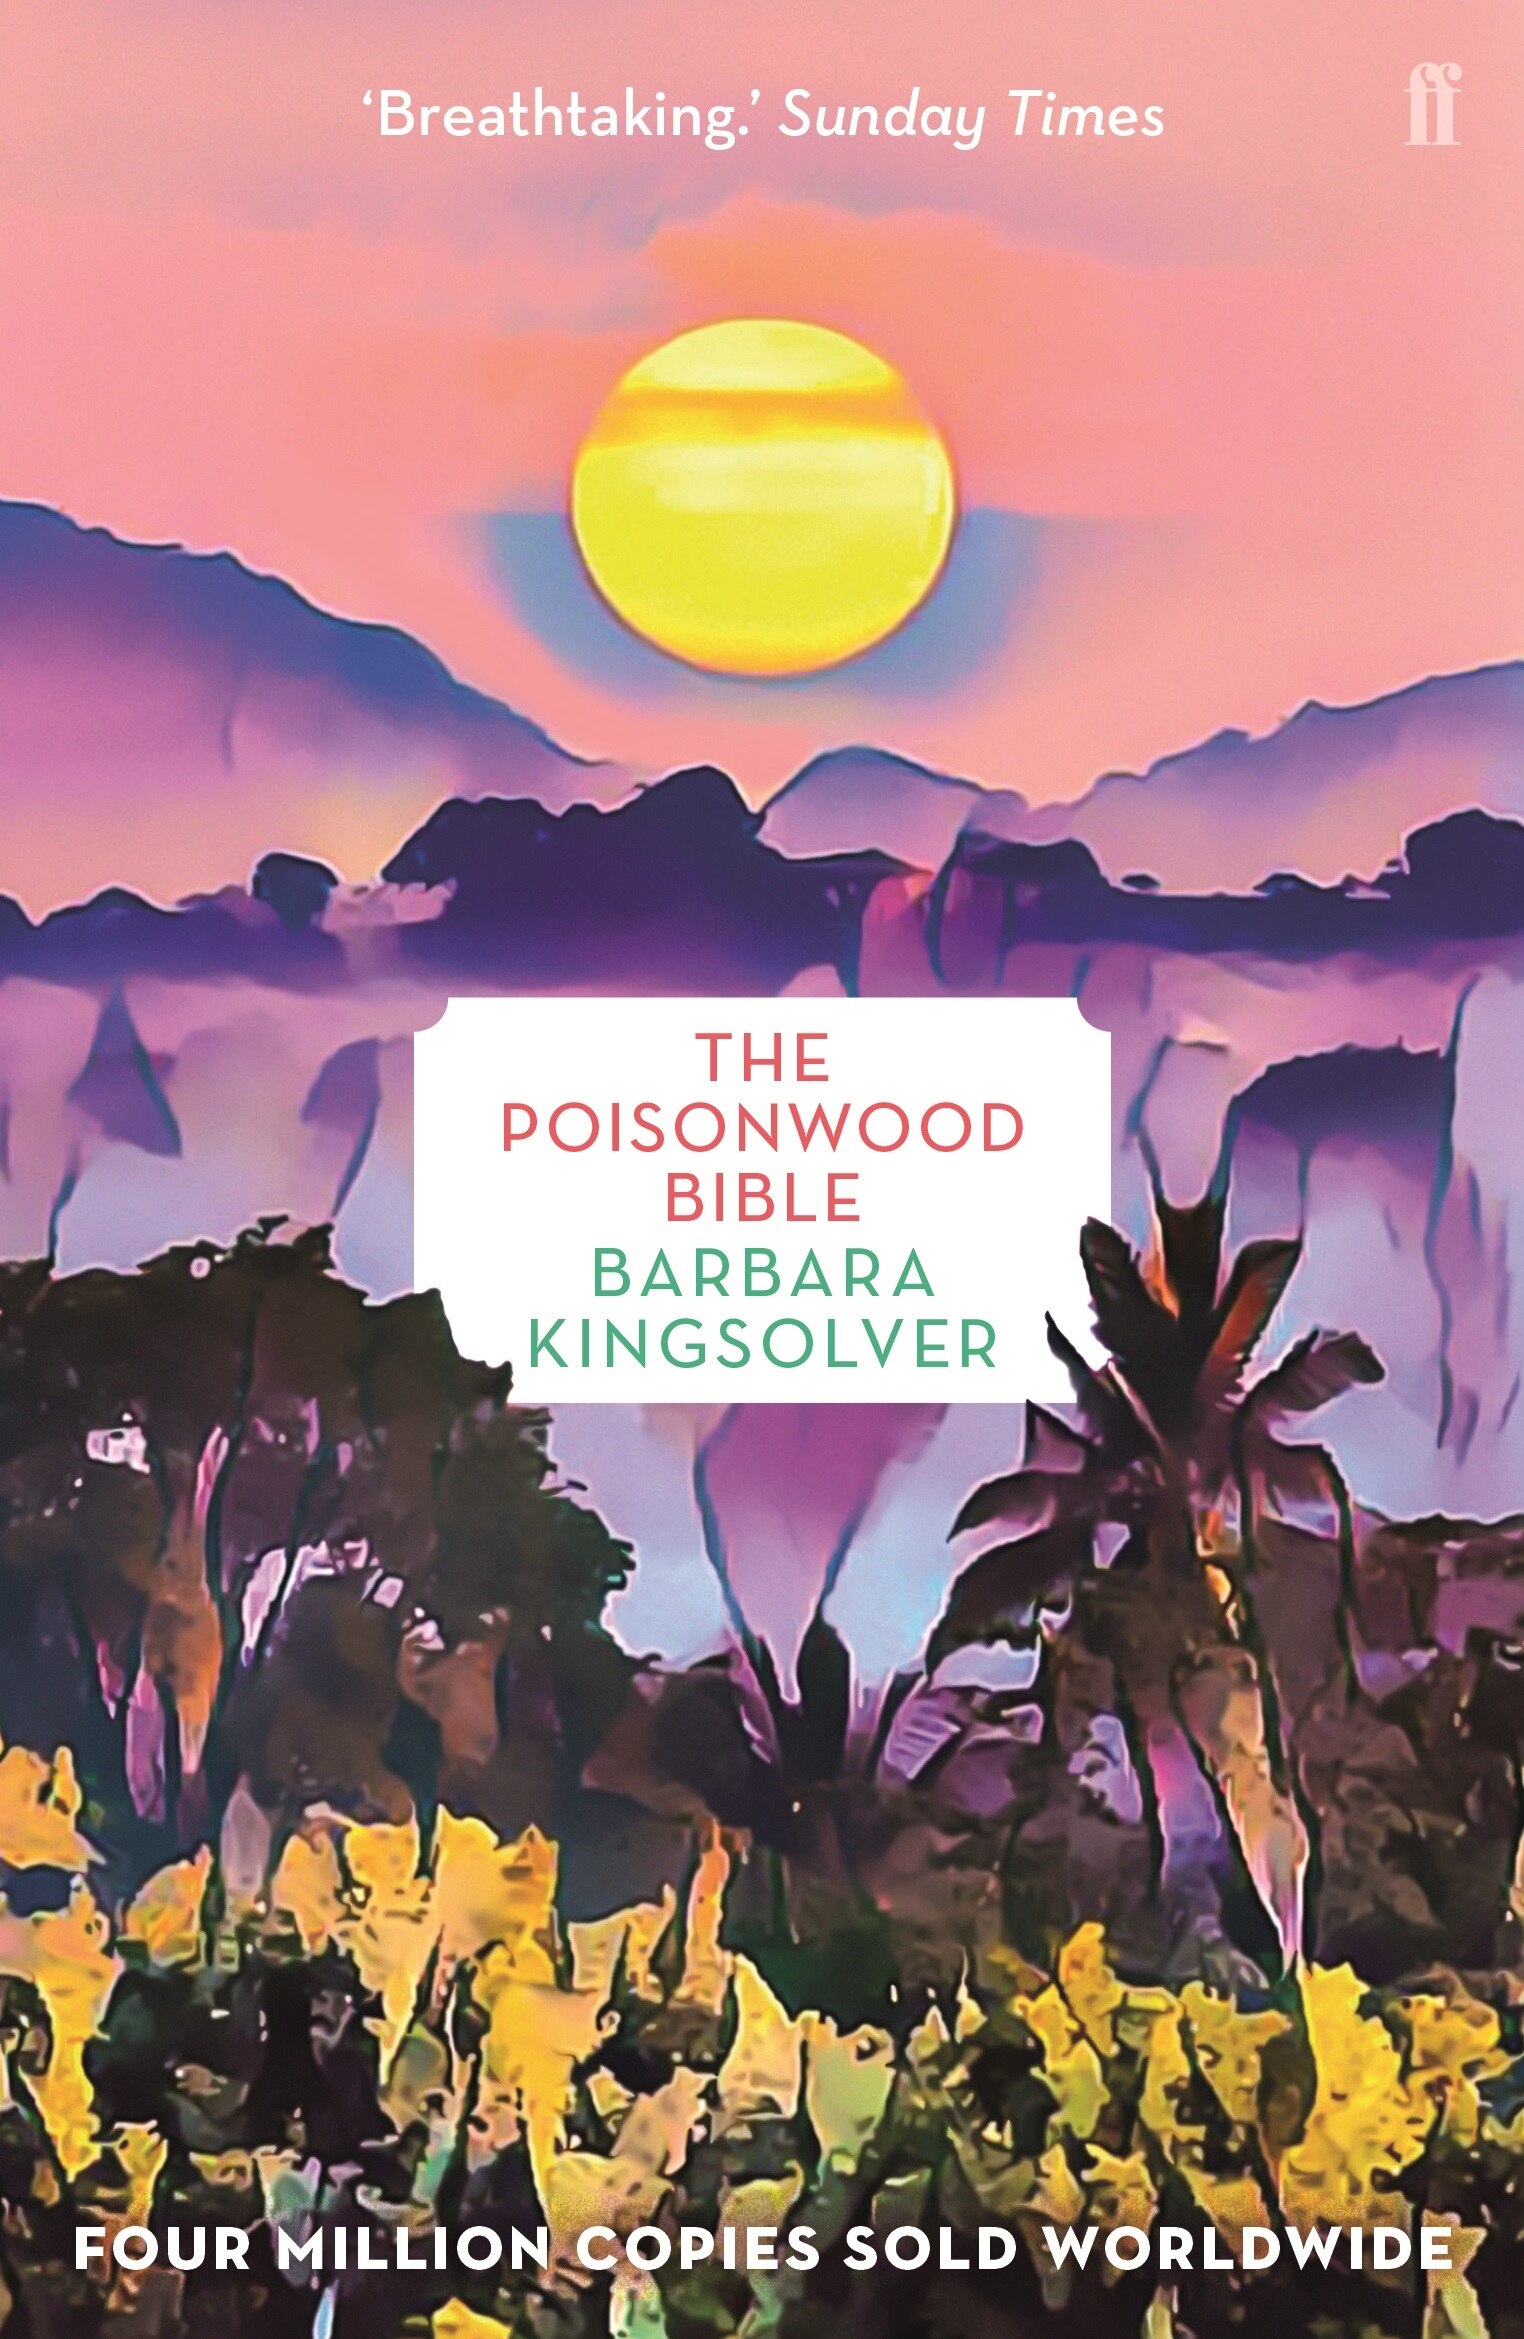 A book cover showing an illustration of a sun in a peach sky hovering above purple mountains and green jungle